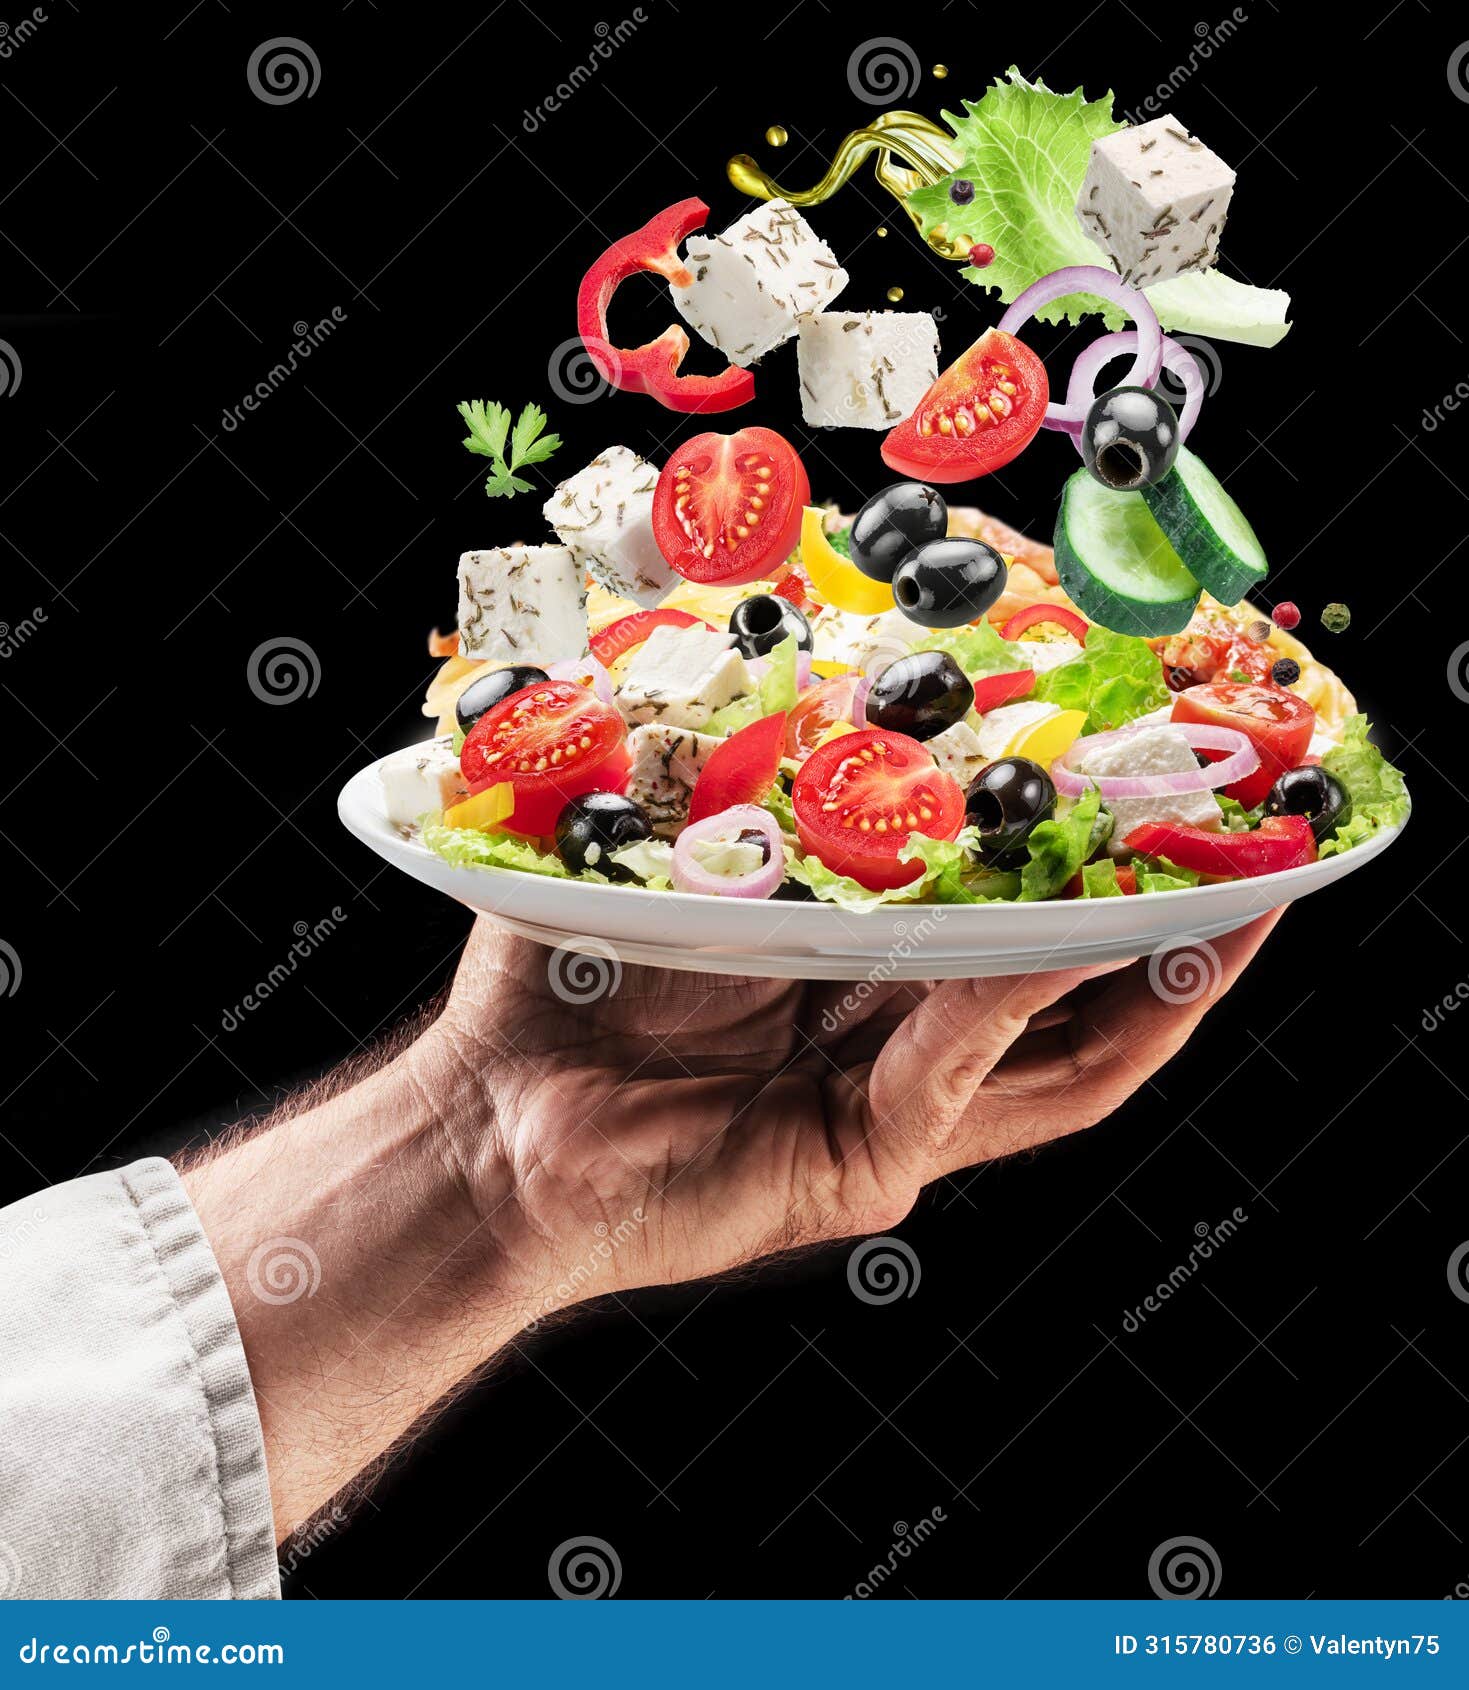 cook holds white plate of greek salad on black background. ingredients of salad falling down om the plate. tasty food background